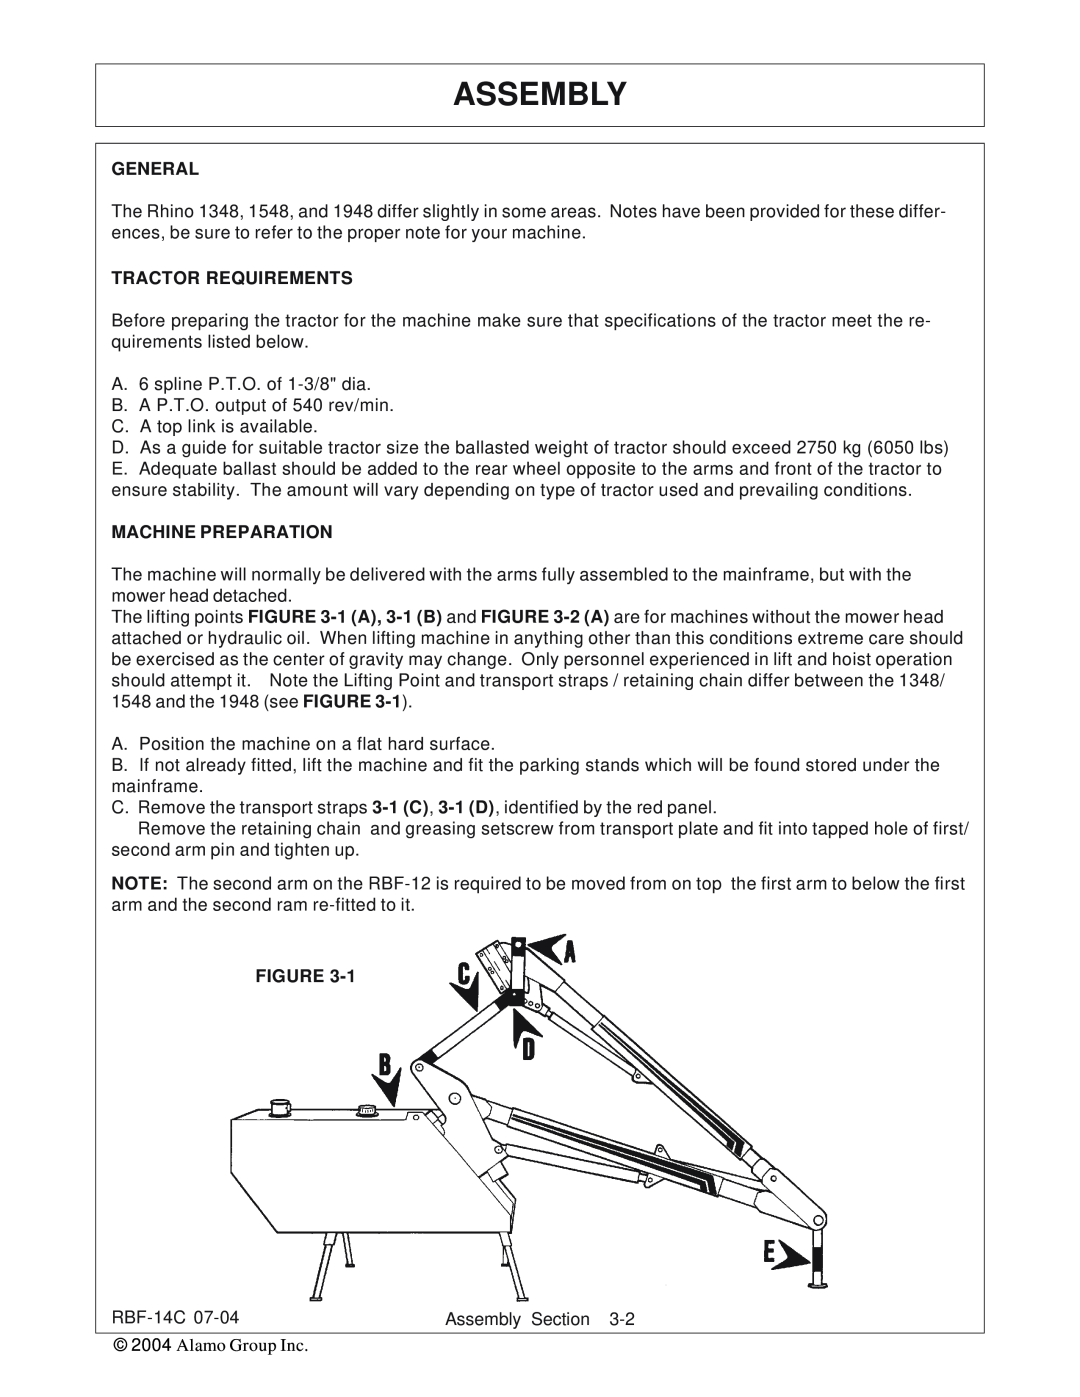 Tiger RBF-14C manual Assembly, General, Tractor Requirements, Machine Preparation, Figure 